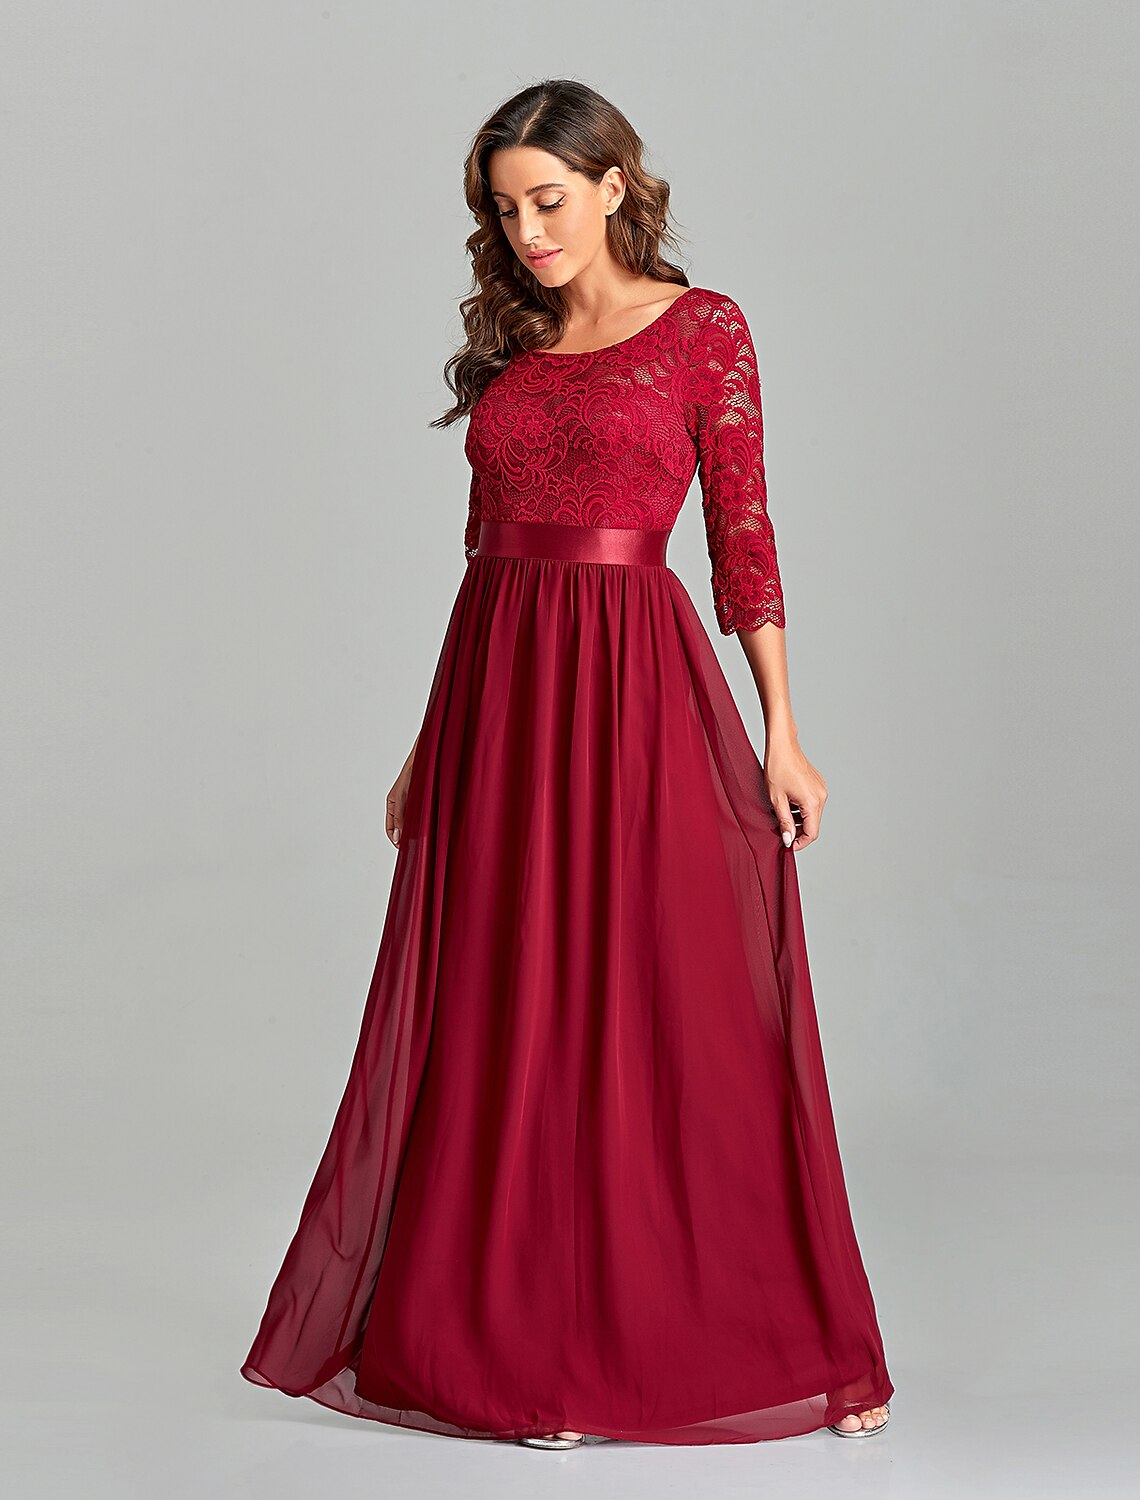 A-Line Evening Gown Beautiful Back Dress Prom Floor Length Half Sleeve Jewel Neck Chiffon V Back with Lace Insert